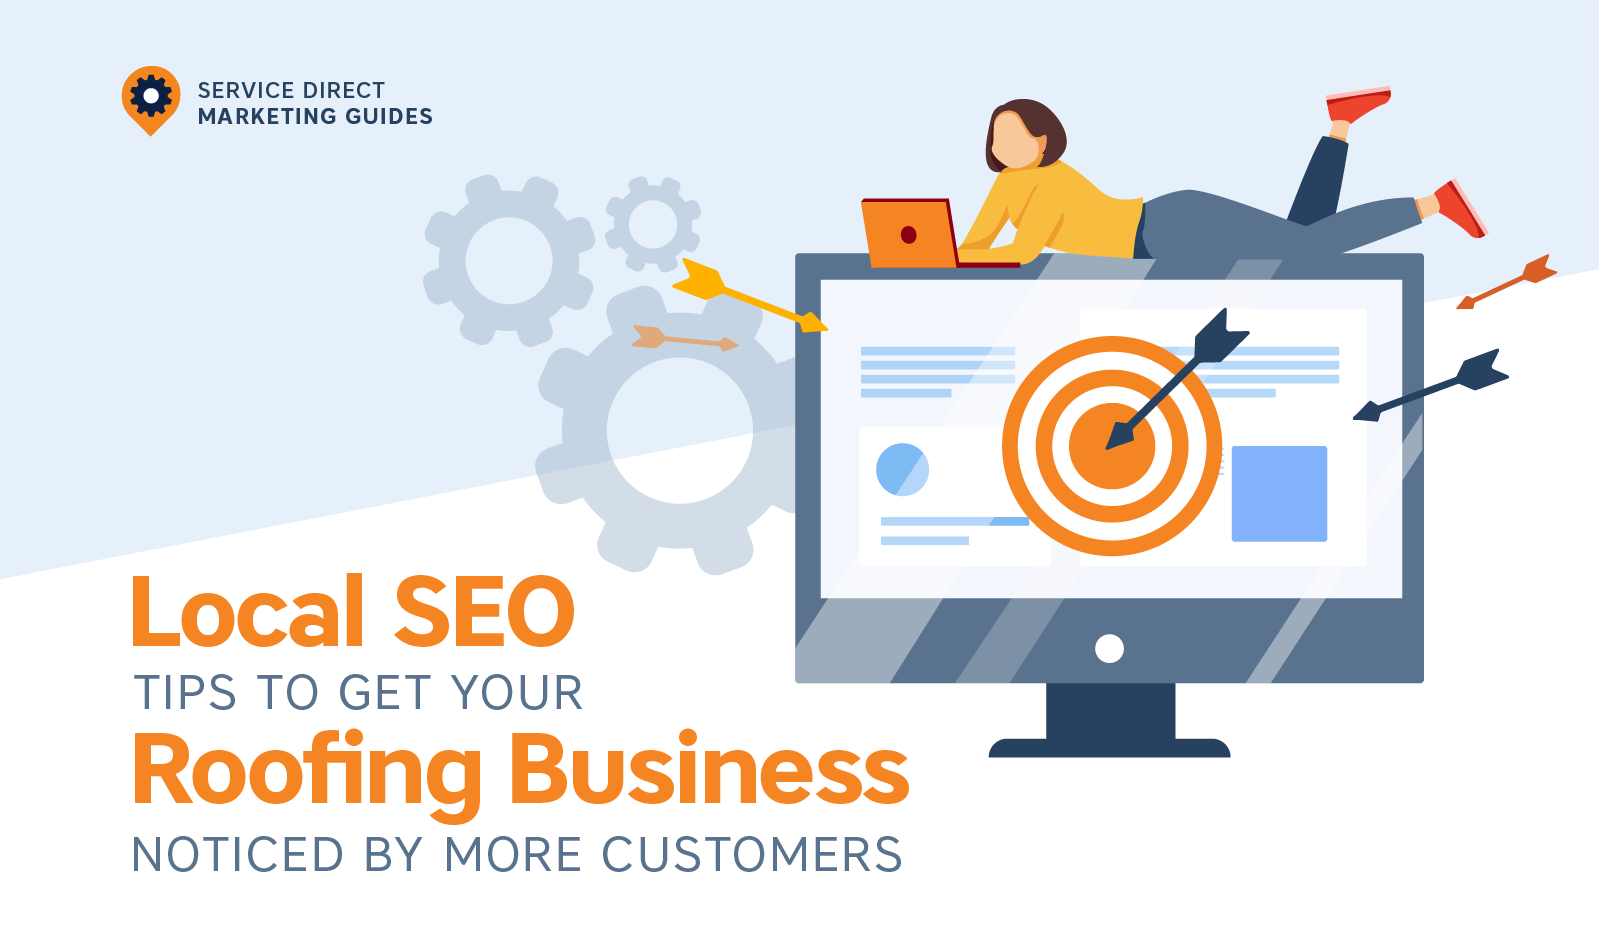 Local SEO Tips to Get Your Roofing Business Noticed by More Customers